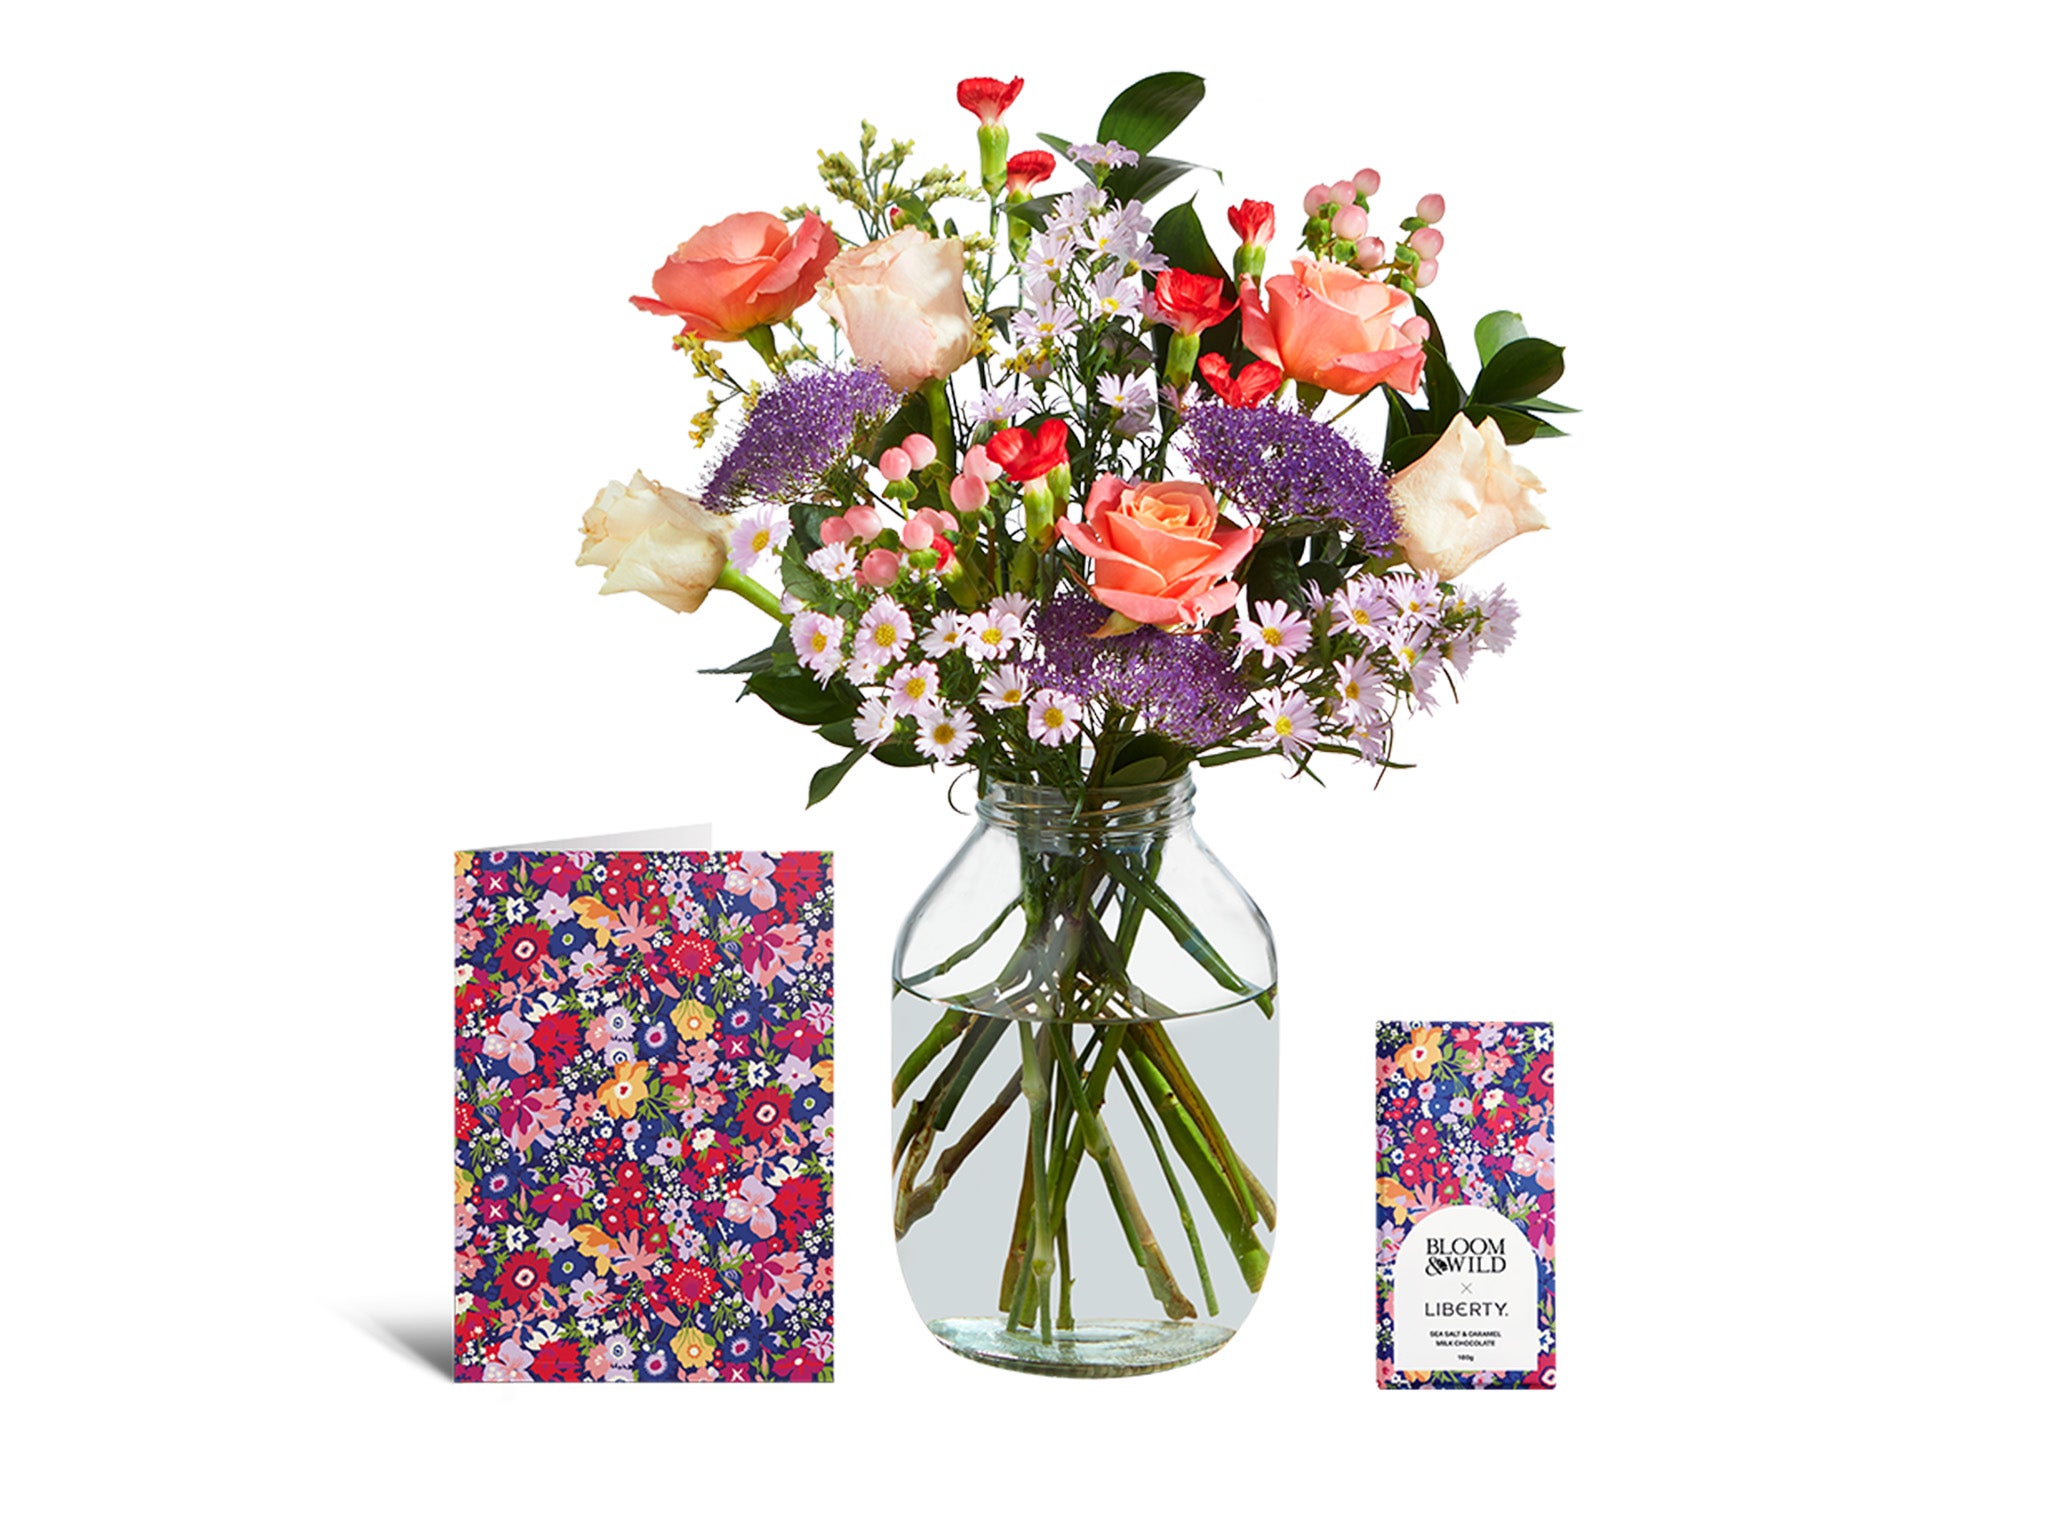 Bloom and Wild the Frances Liberty bouquet